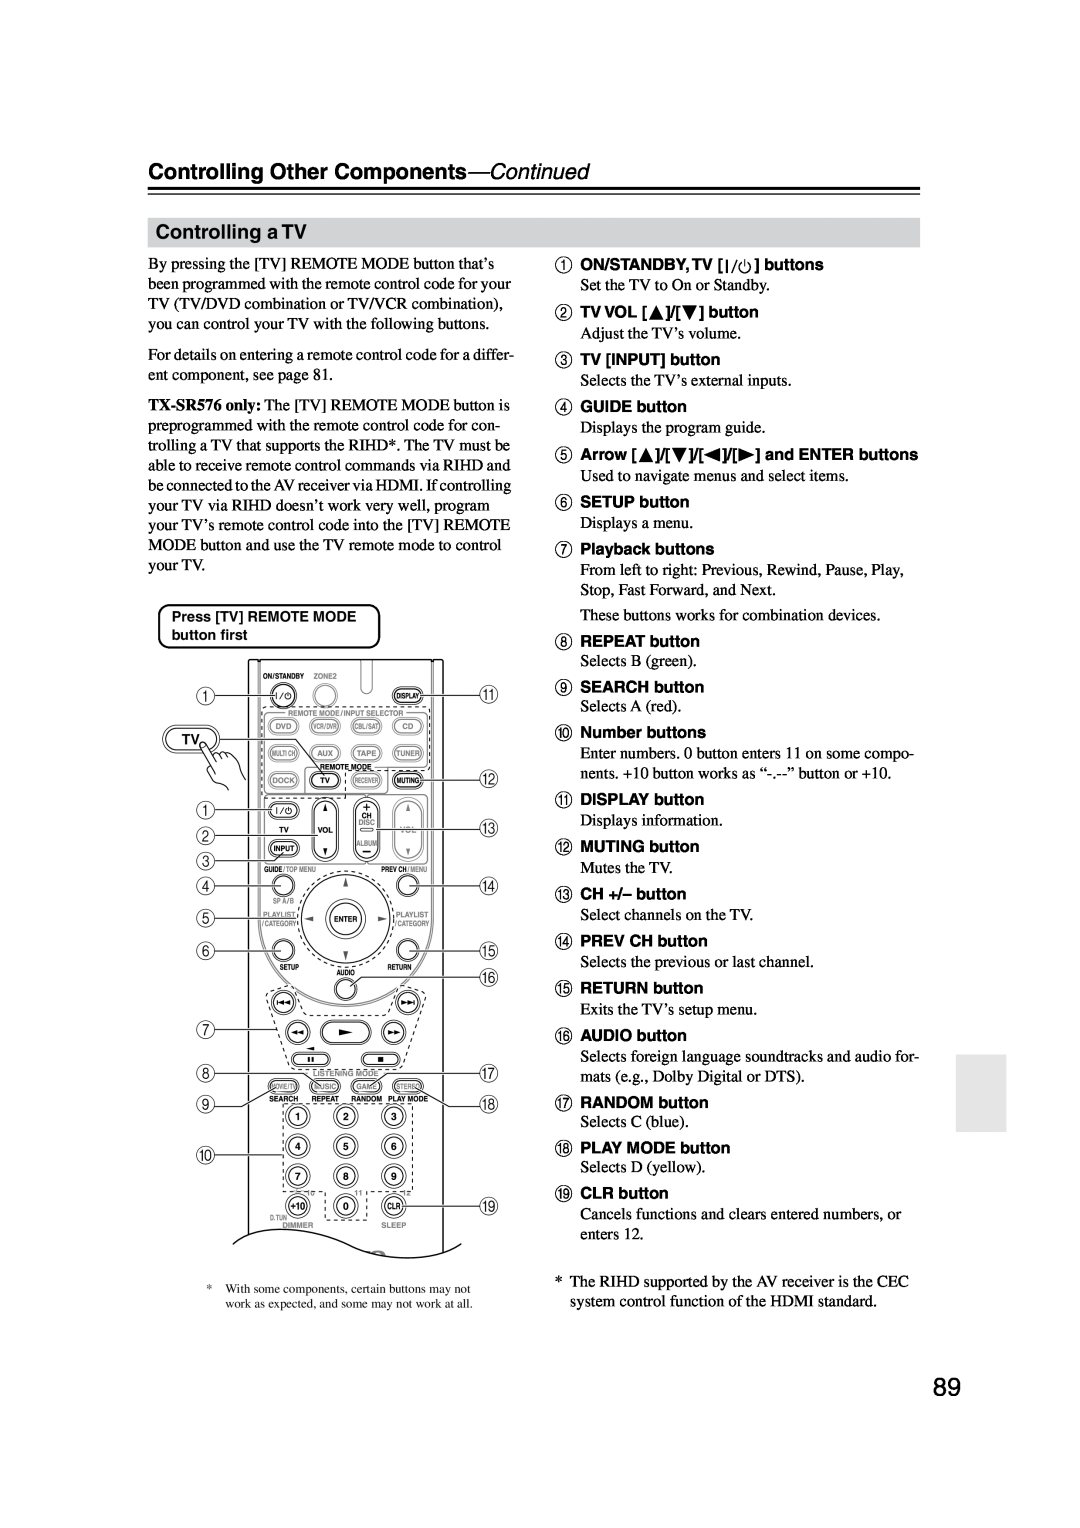 Onkyo TX-SR576, TX-SR506 instruction manual Controlling a TV, Controlling Other Components—Continued 